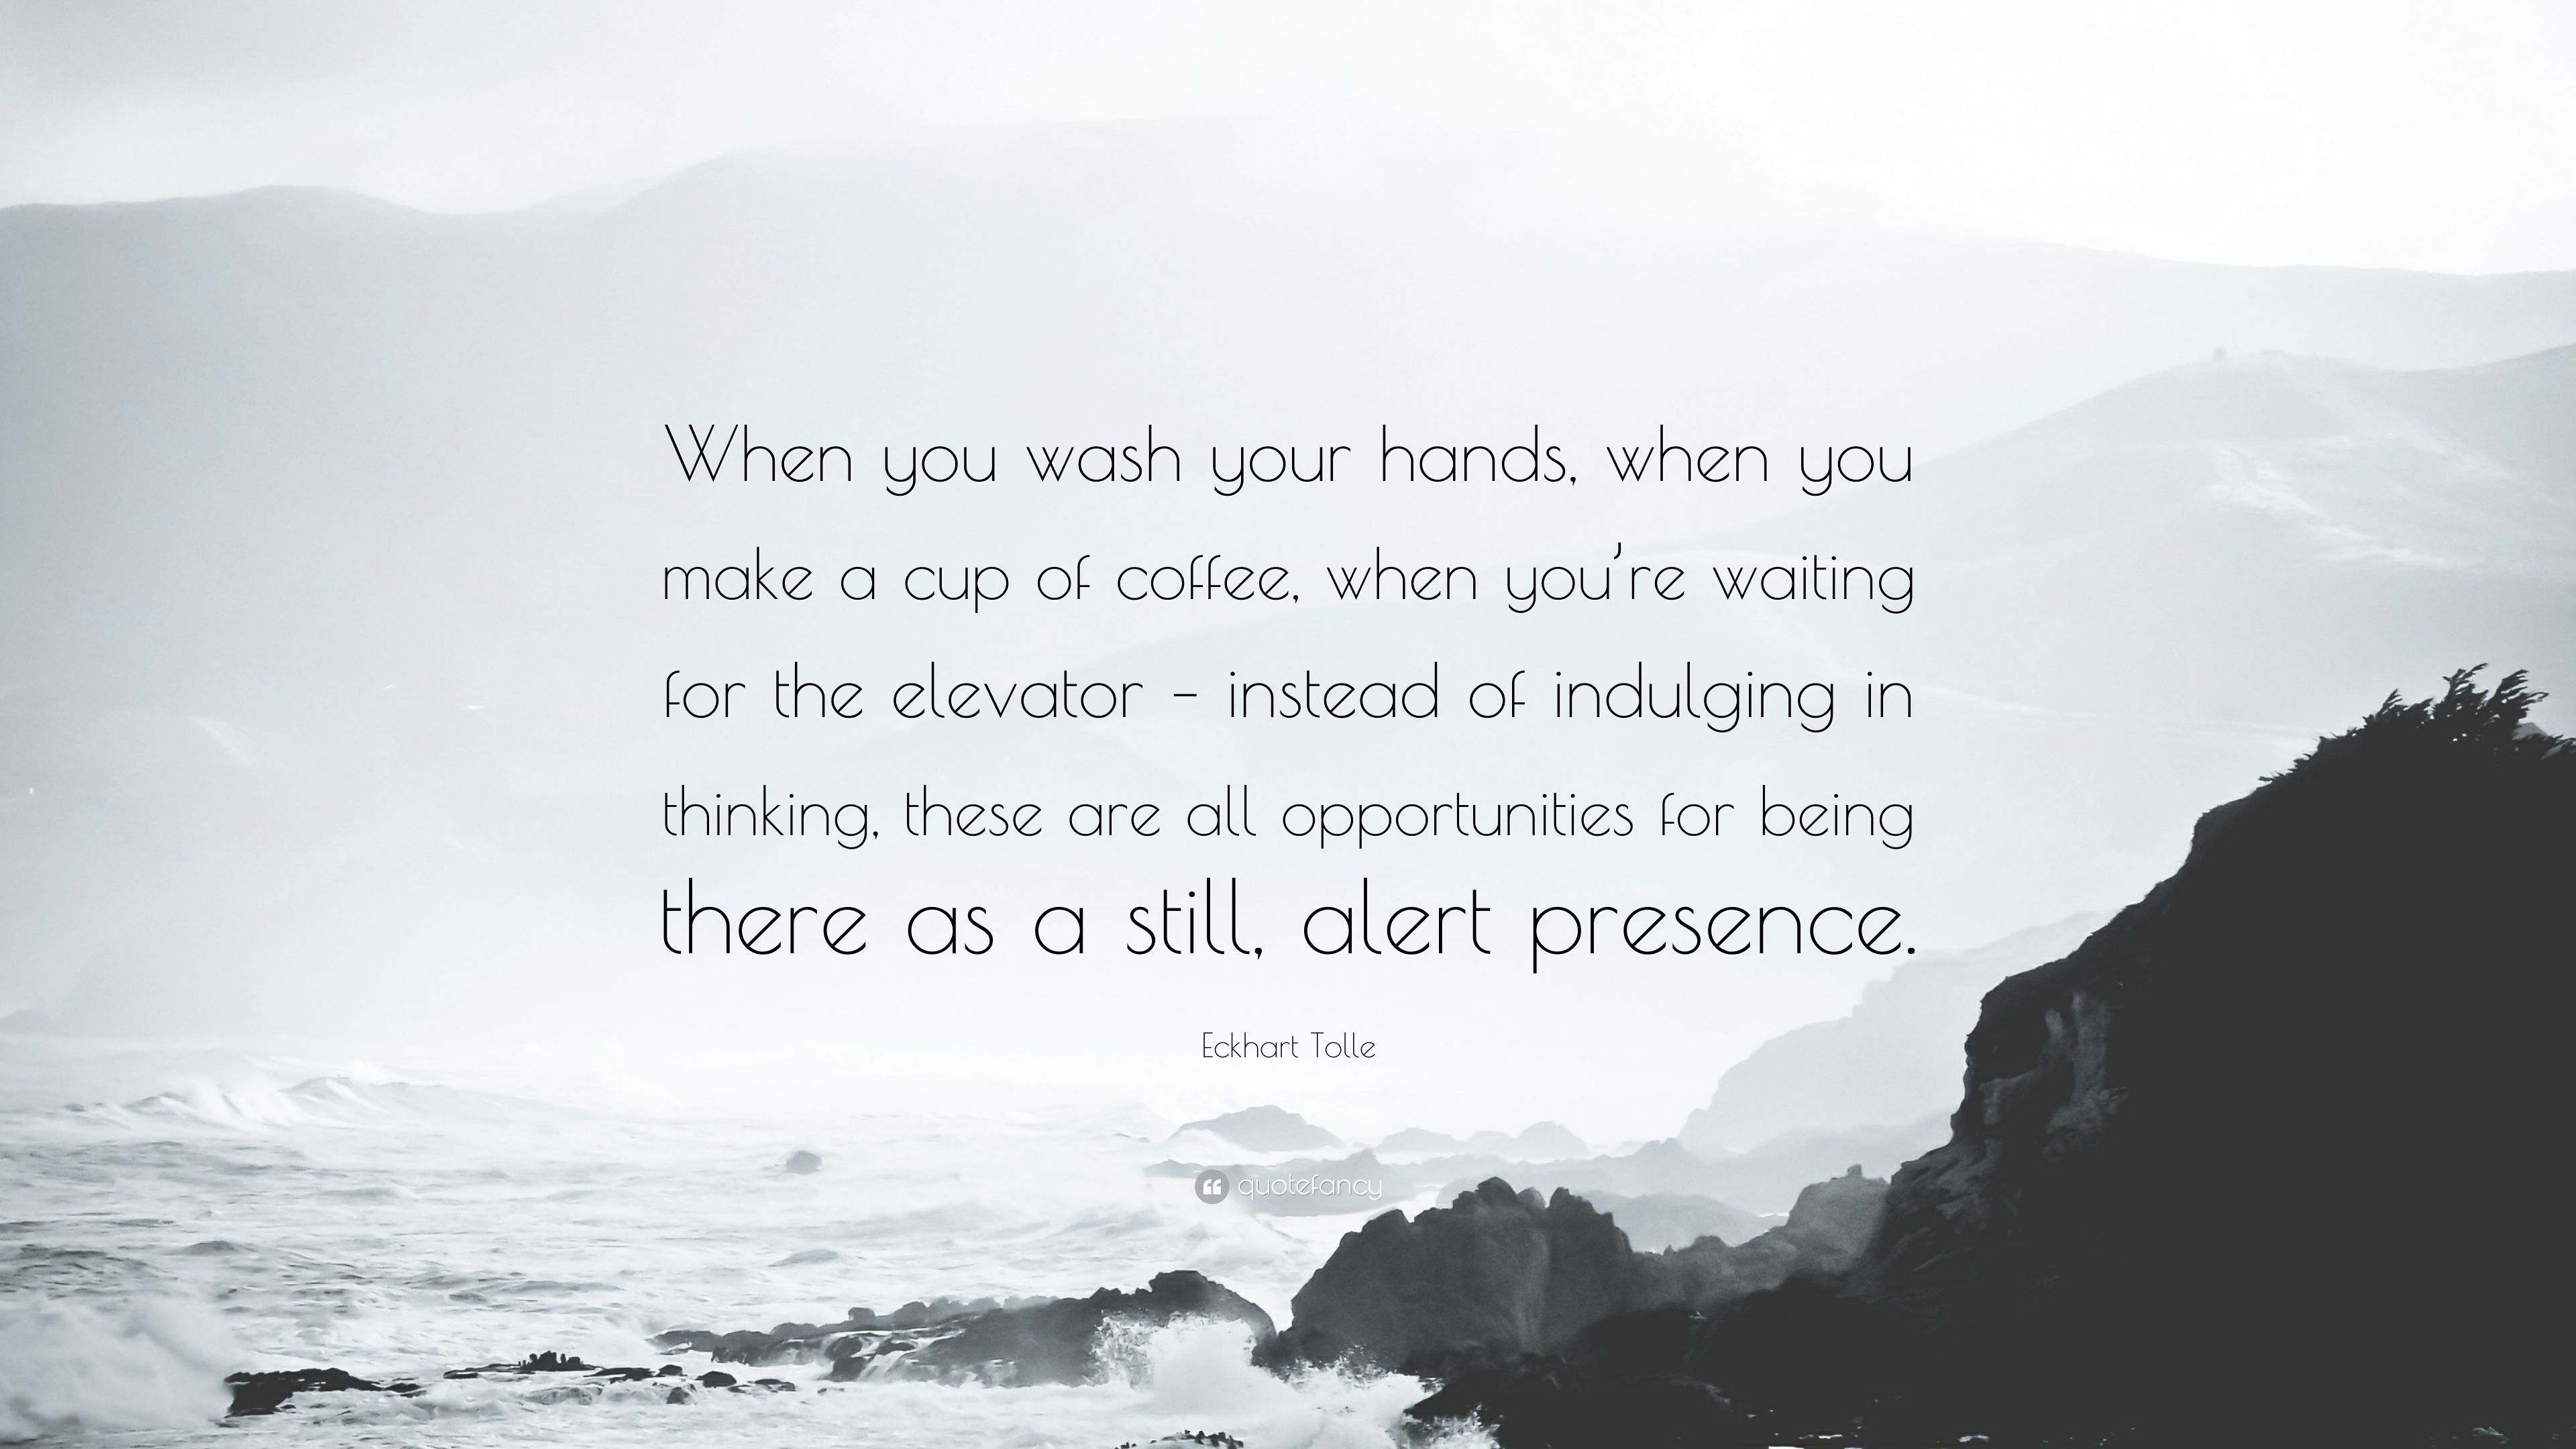 Eckhart Tolle Quote: “When you wash your hands, when you make a